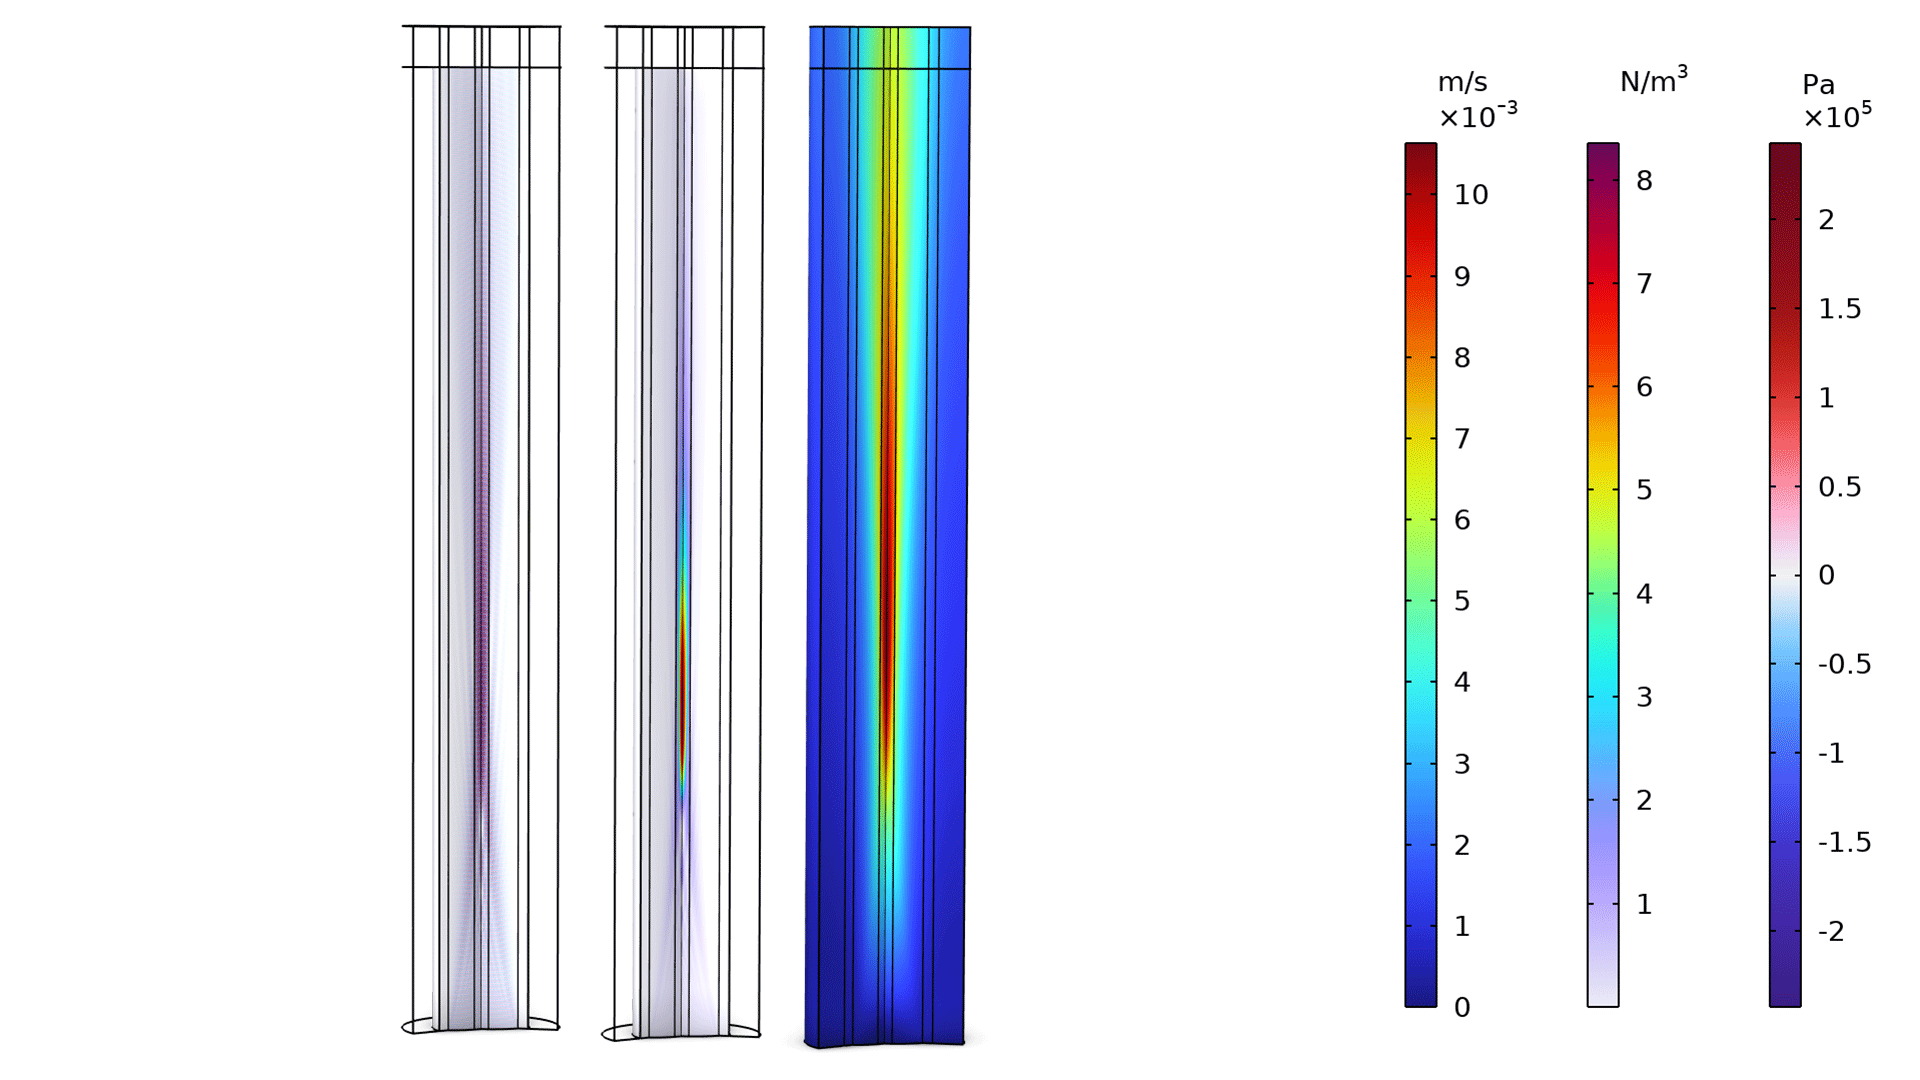 The acoustic streaming of an ultrasound beam displayed in the Rainbow, Prism, and Wave color tables.